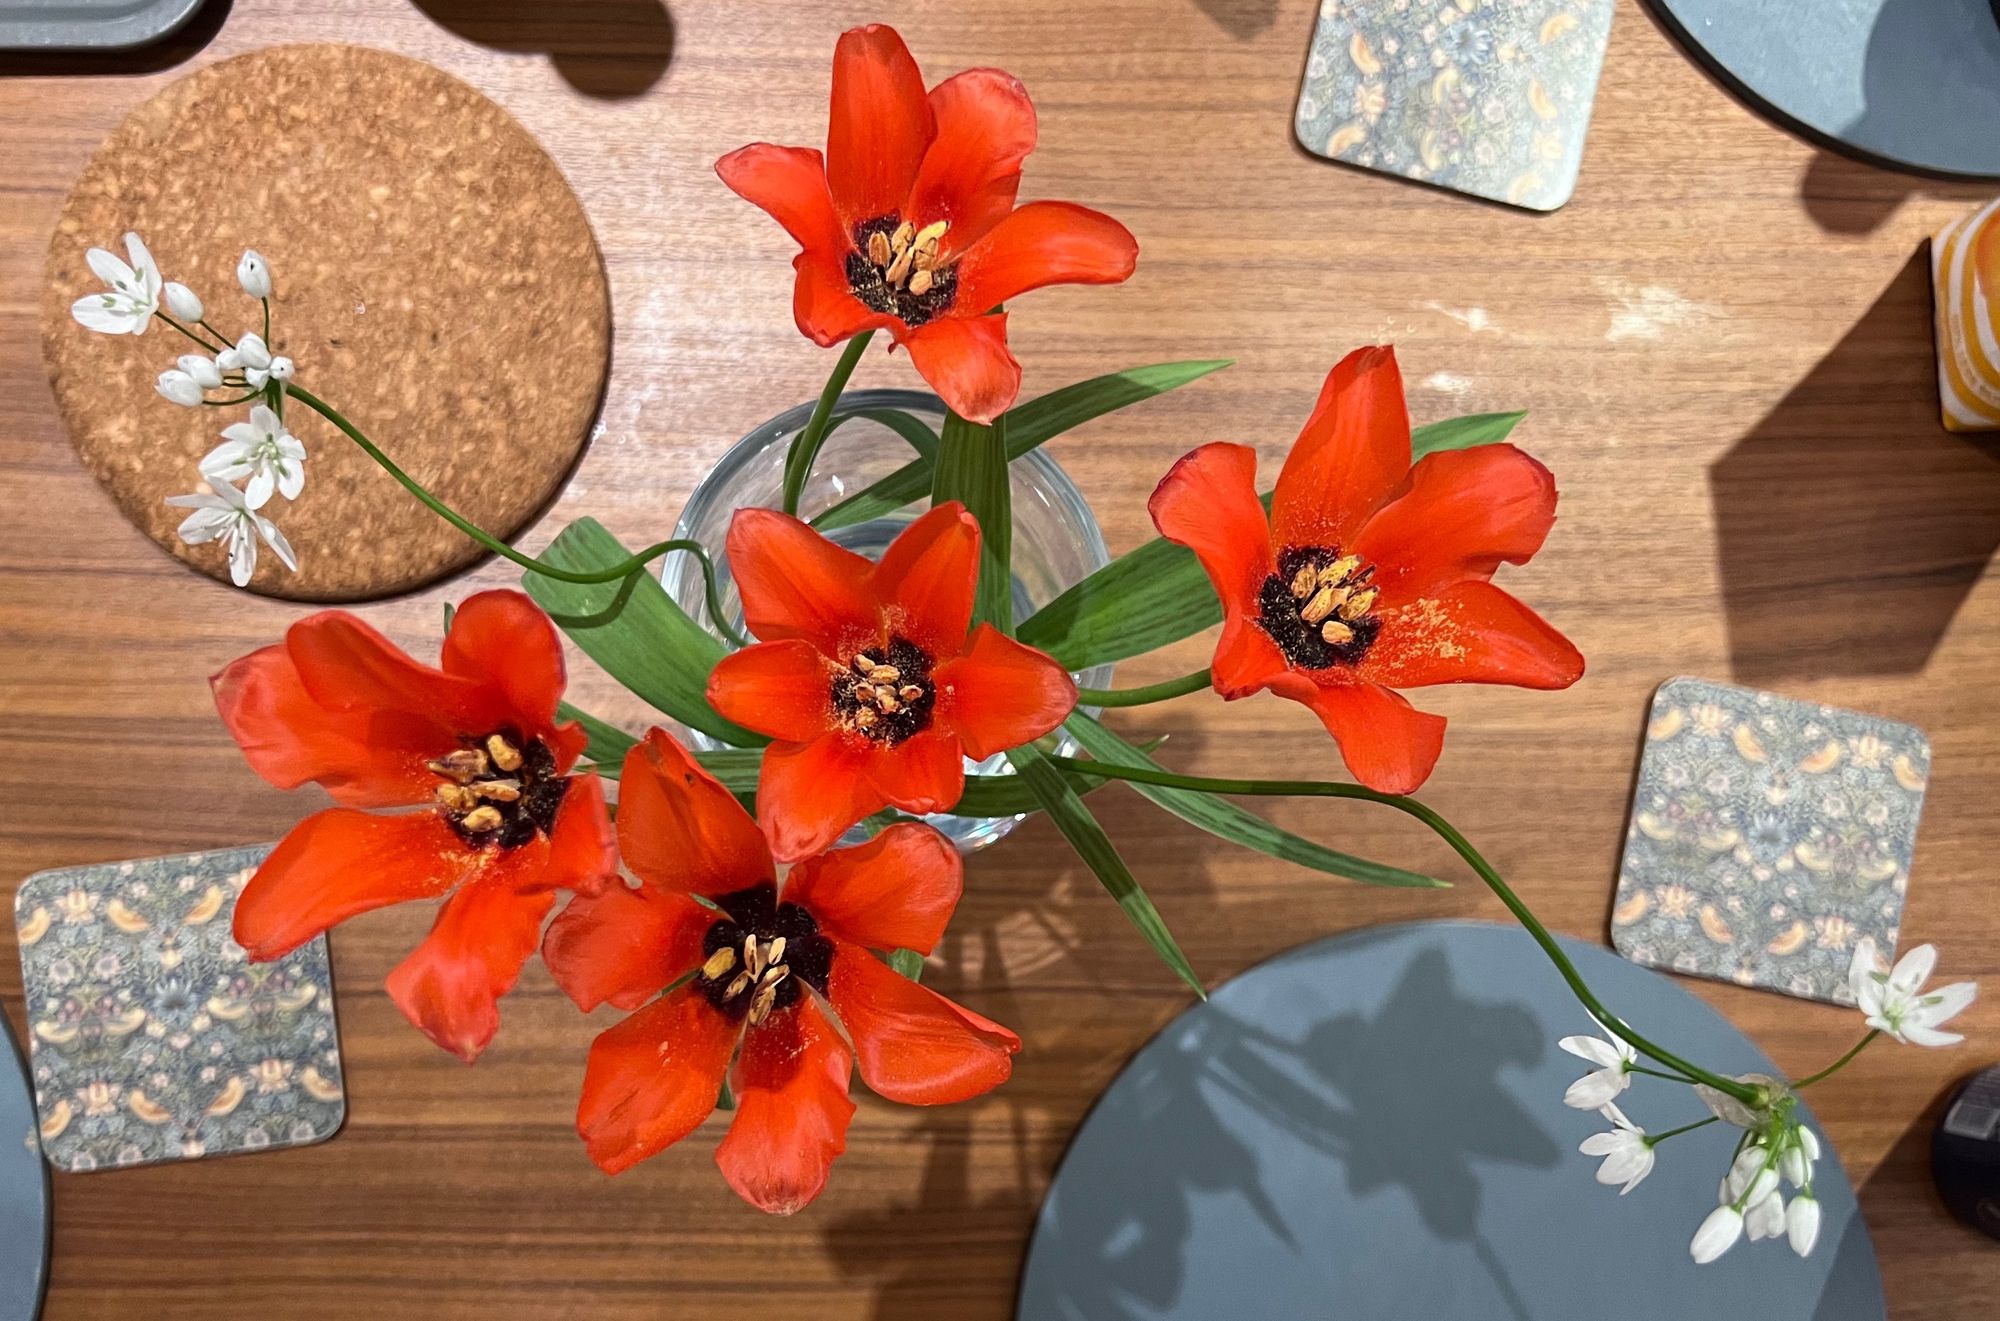 From above, red tulips and white albums in a vase on a dinner table, with coasters scattered around it.